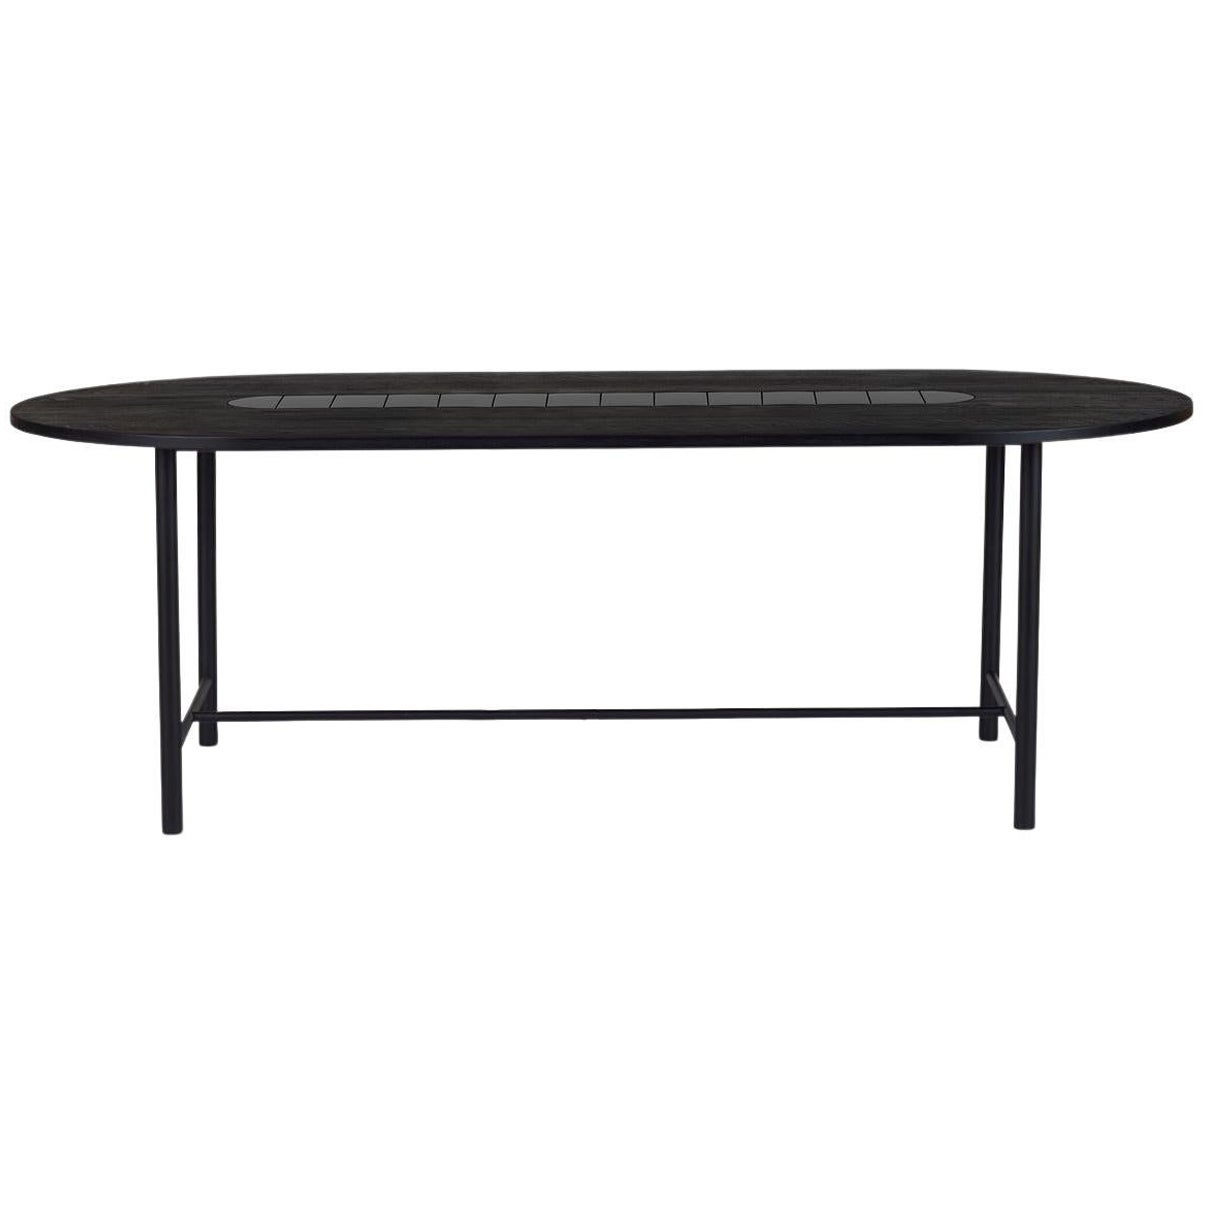 Be My Guest Dining Table 240 Black Oak Soft Black Tiles by Warm Nordic For Sale